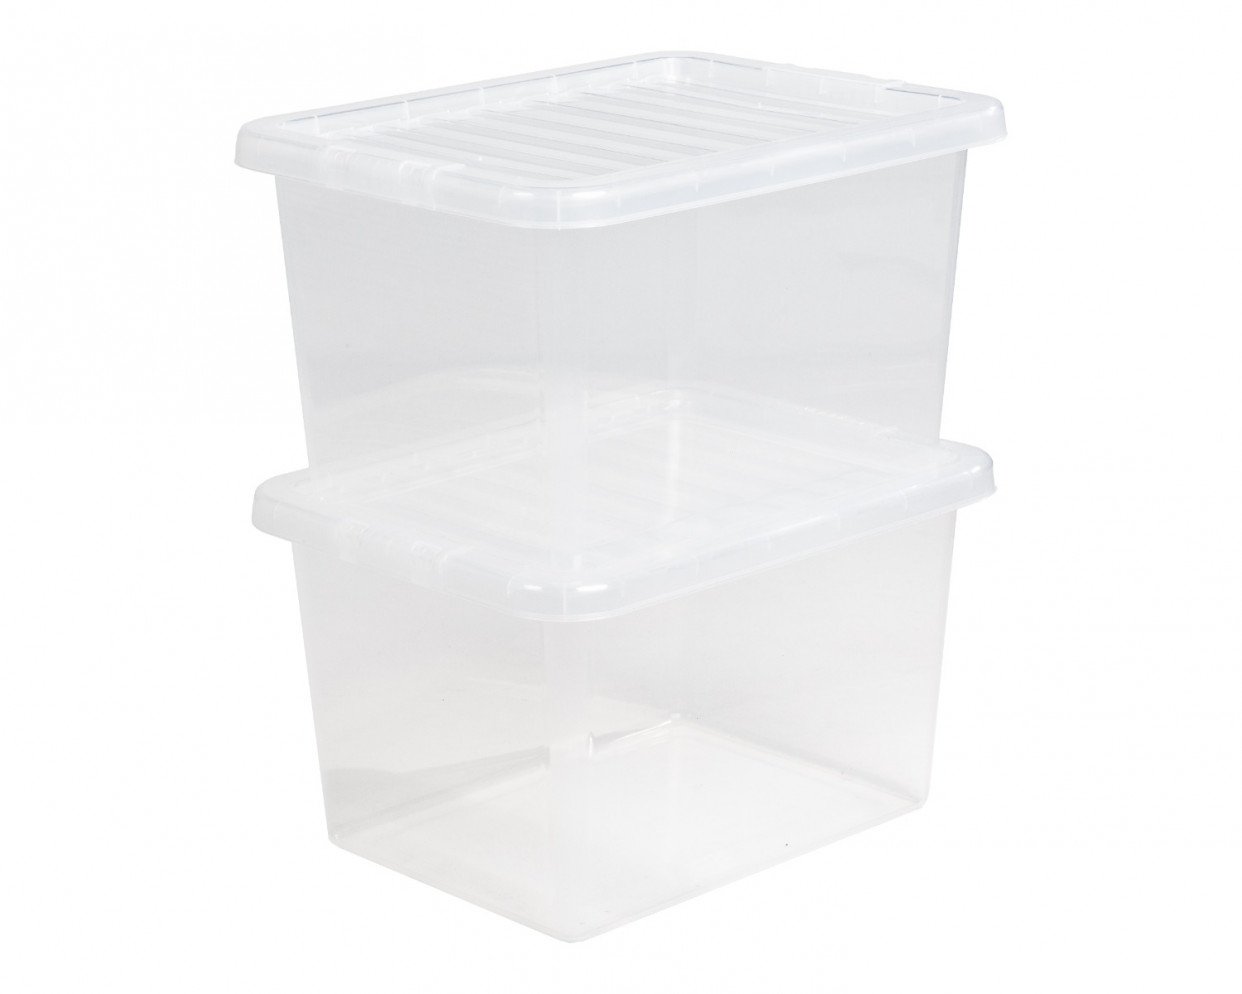 Wham Crystal Stackable Plastic Storage Box & Lid, Clear - 25 Litre>